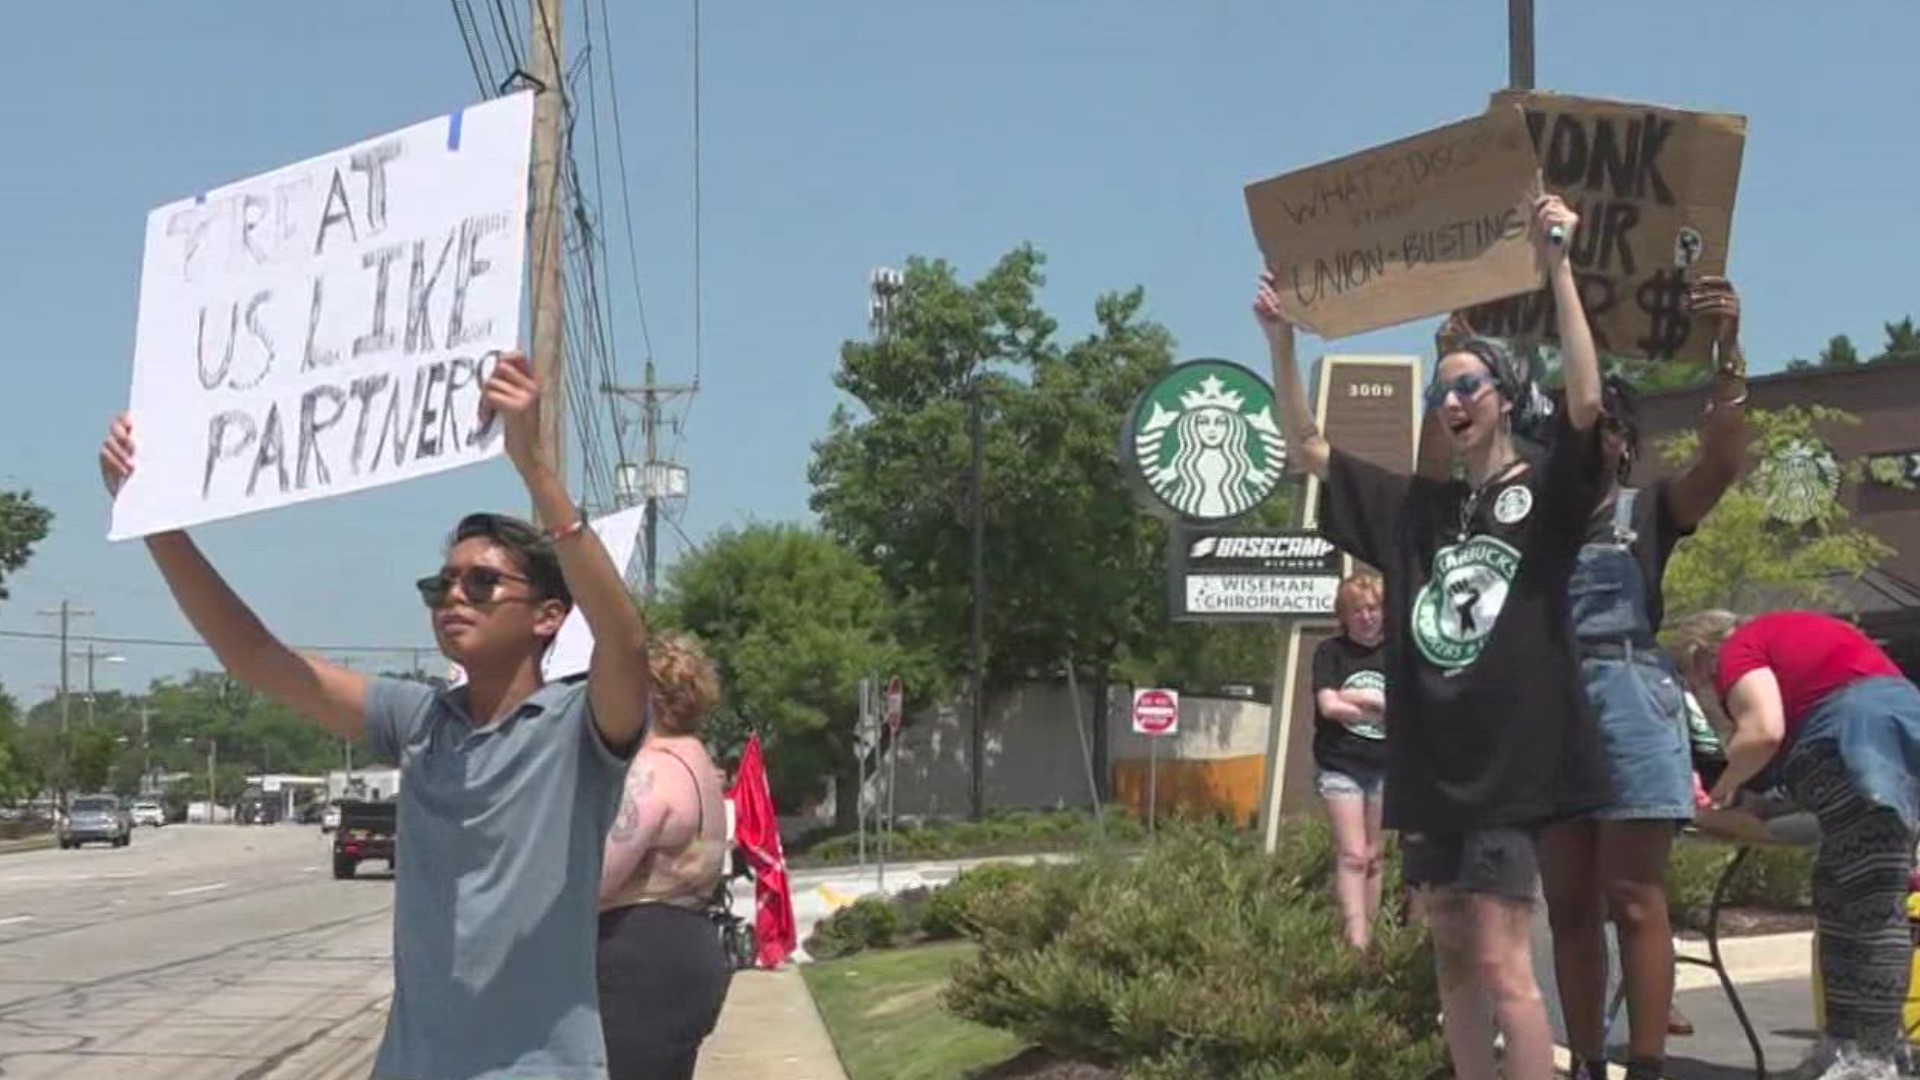 Workers at the Starbucks on Millwood Avenue in Columbia are striking after they say they have faced backlash from the company while trying to unionize